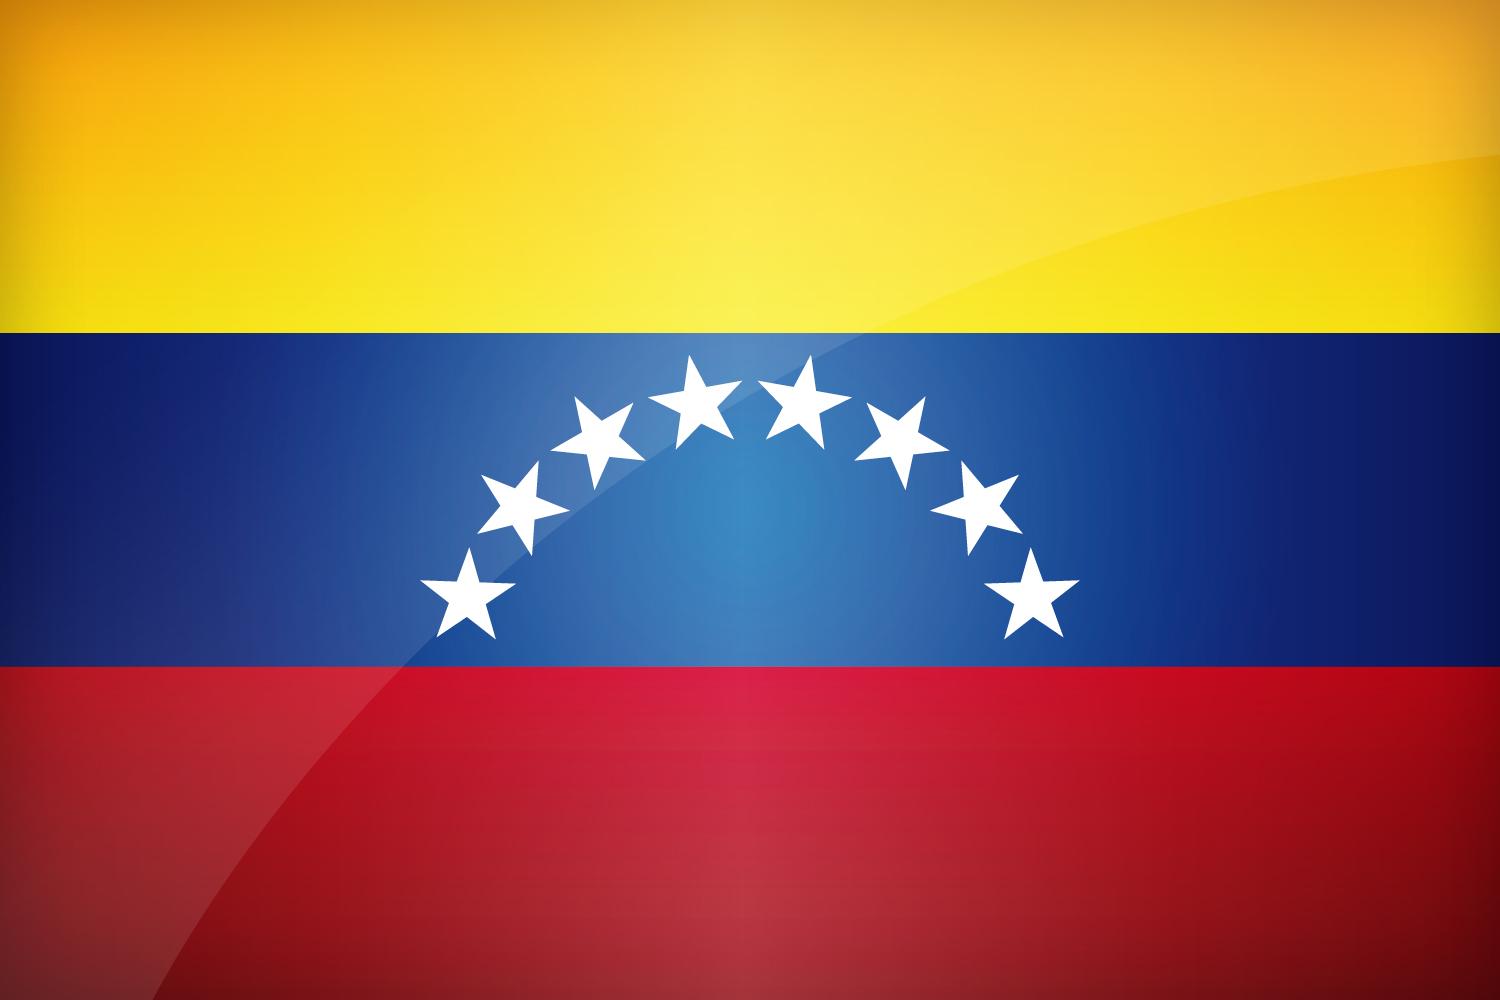 Venezuela: Statement by civil society organizations on the decentralized office of the Prosecutor of the ICC in Caracas